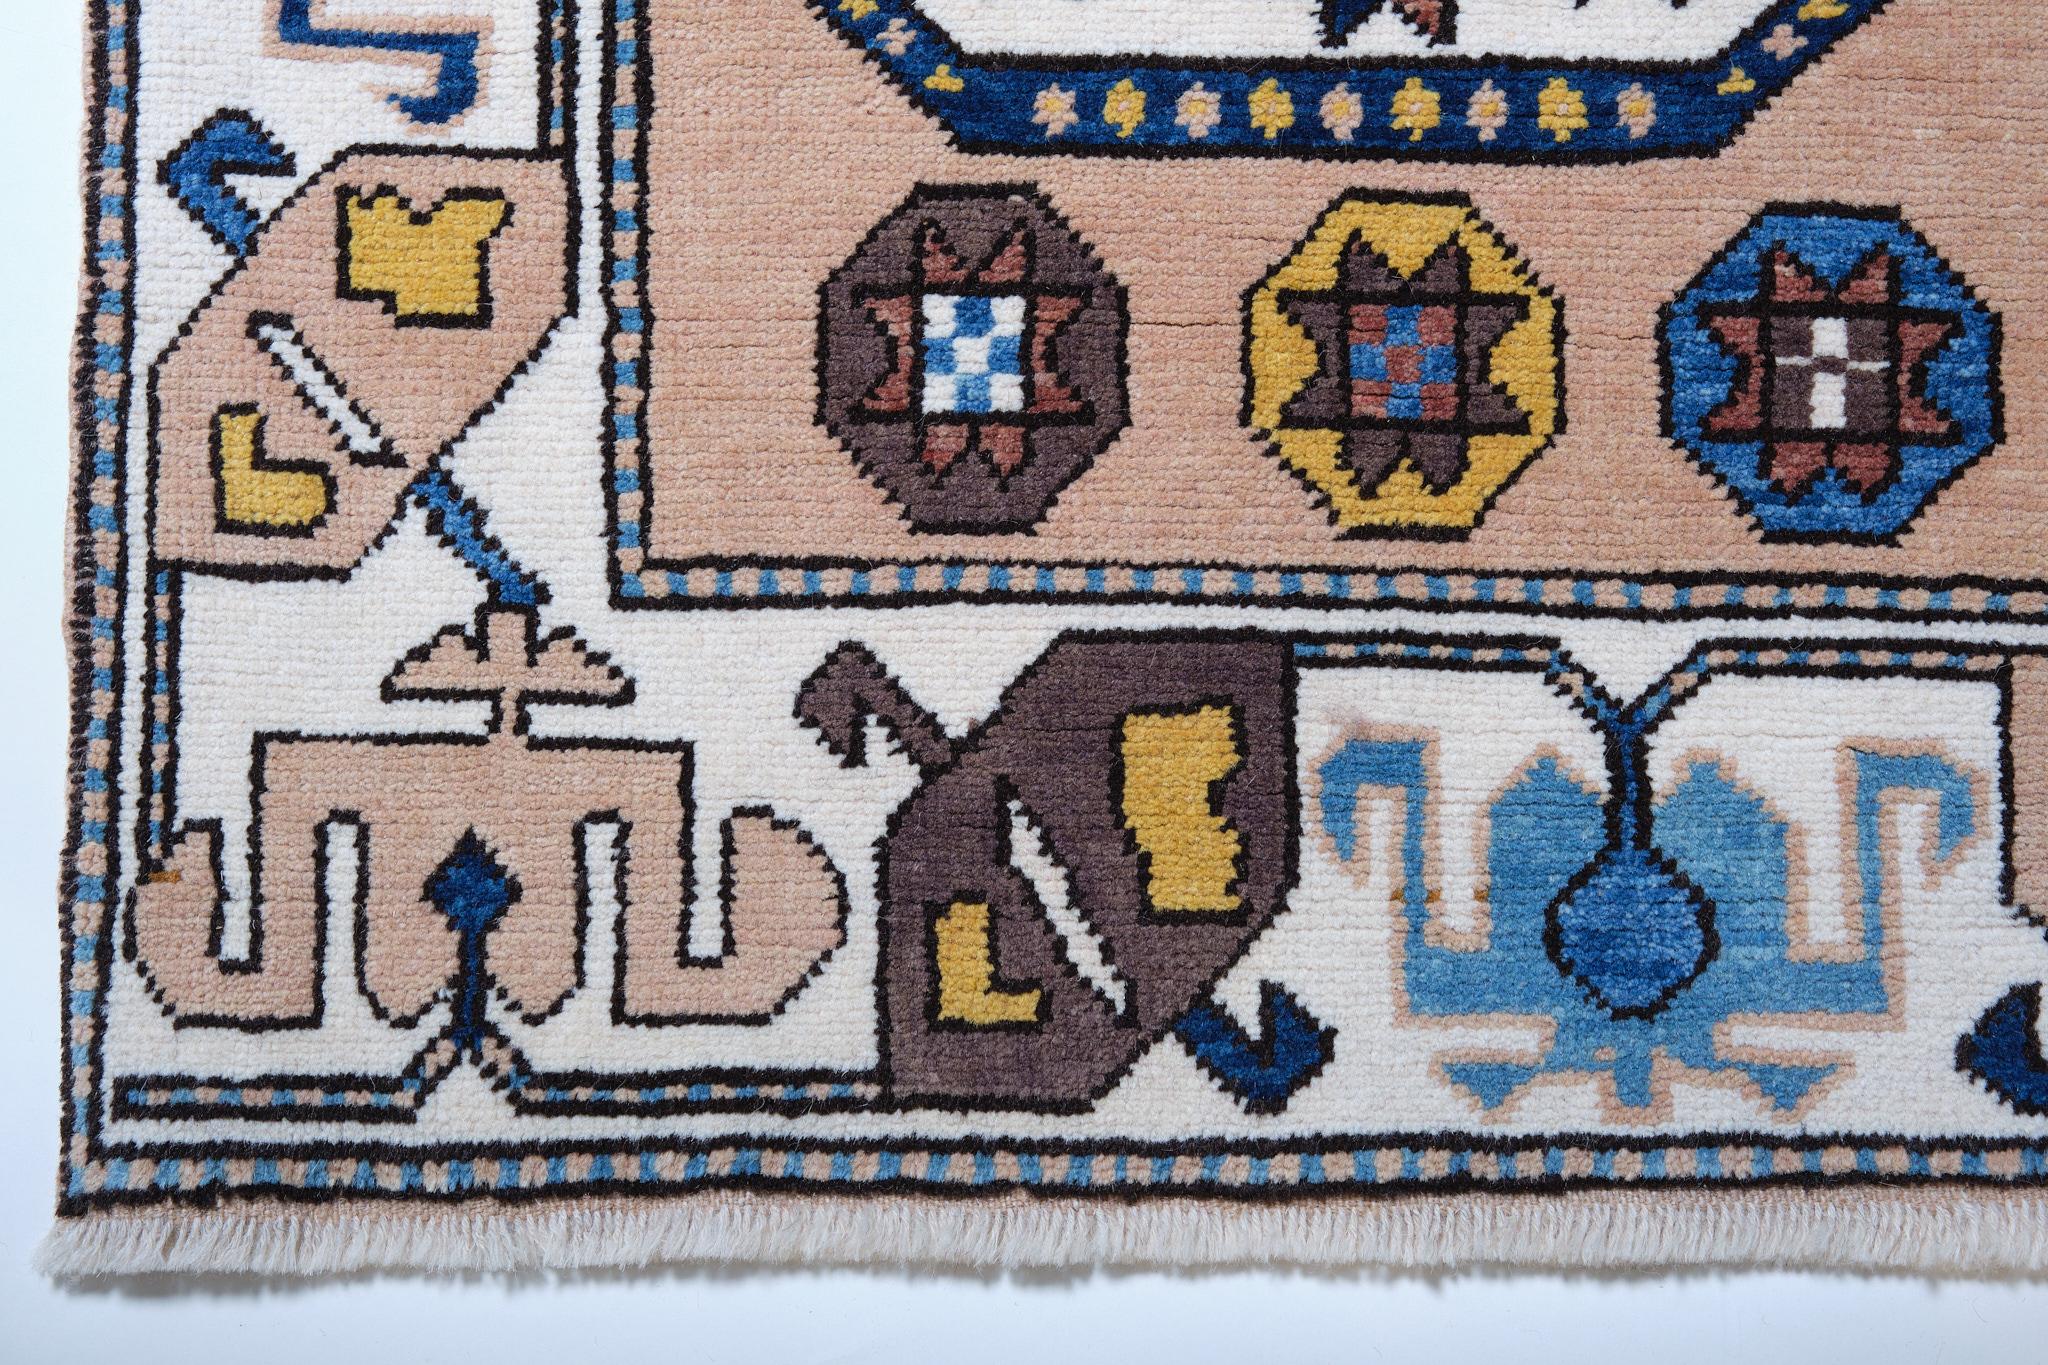 The source of the rug comes from the book Orient Star – A Carpet Collection, E. Heinrich Kirchheim, Hali Publications Ltd, 1993 nr.160. This unusual shape of a central octagon and cross-shaped hooks in the diamond design 17th-century rug from the